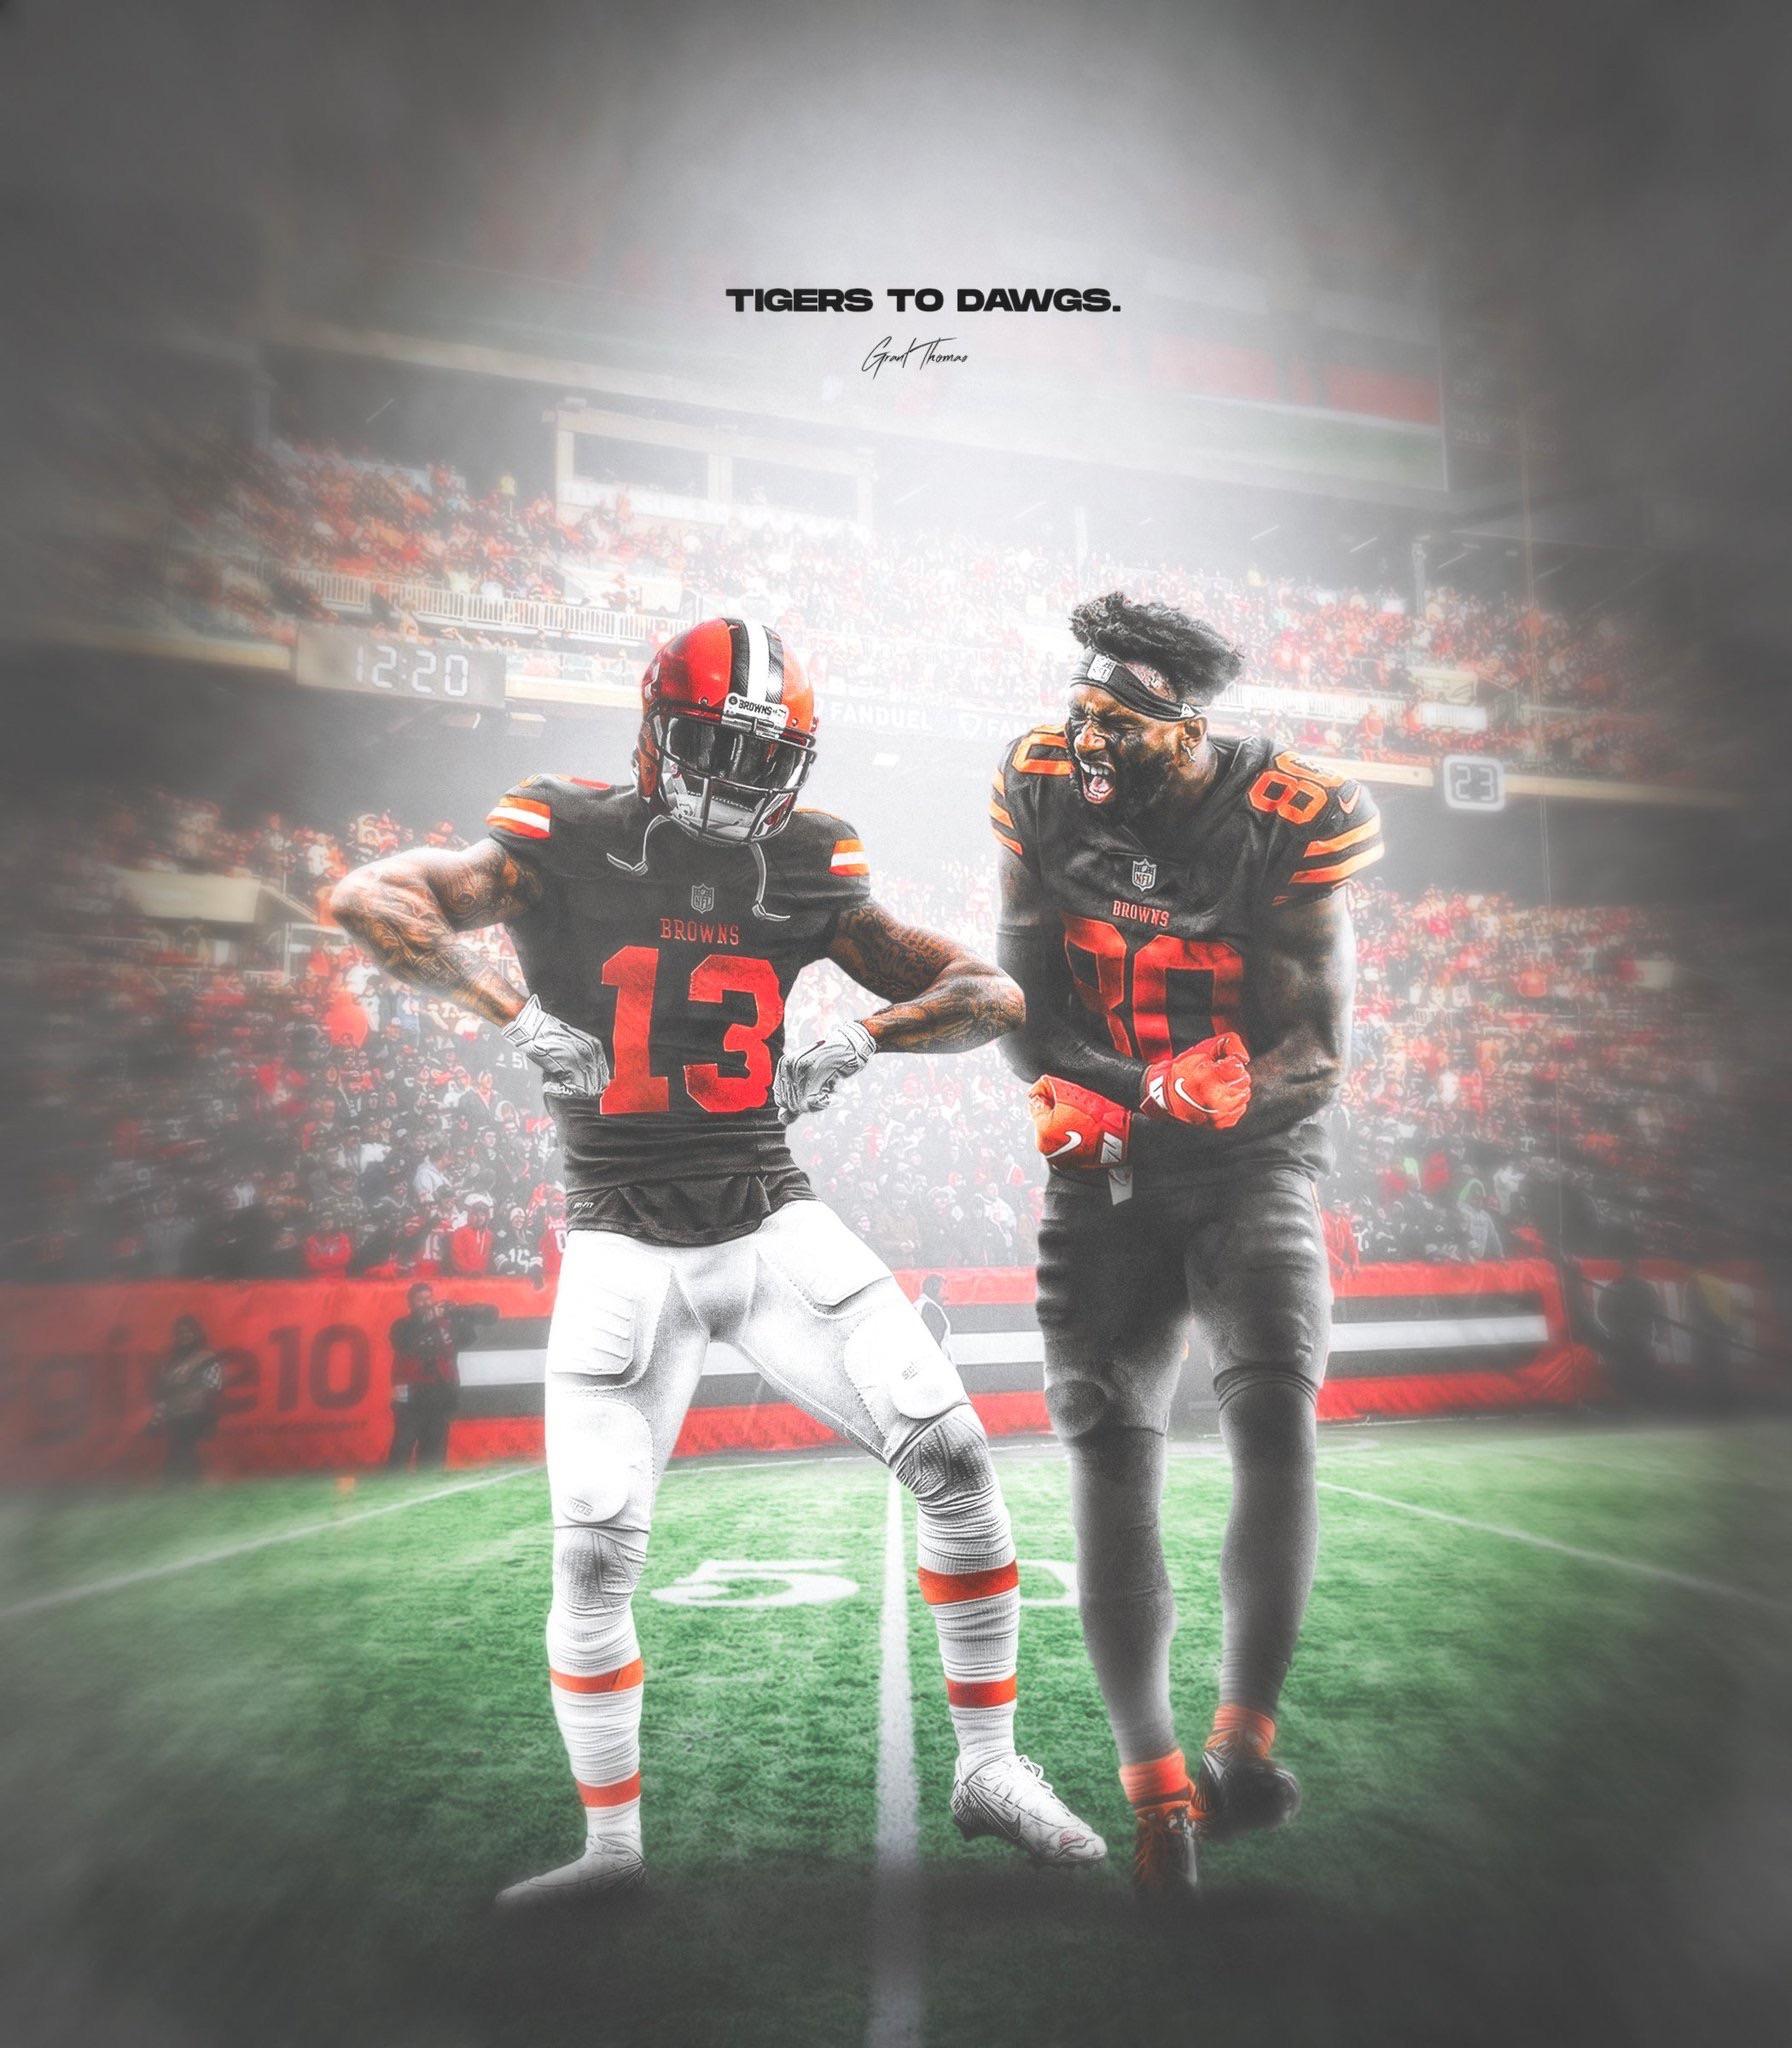 OC Tigers to Dawgs Poster. OBJ and Landry